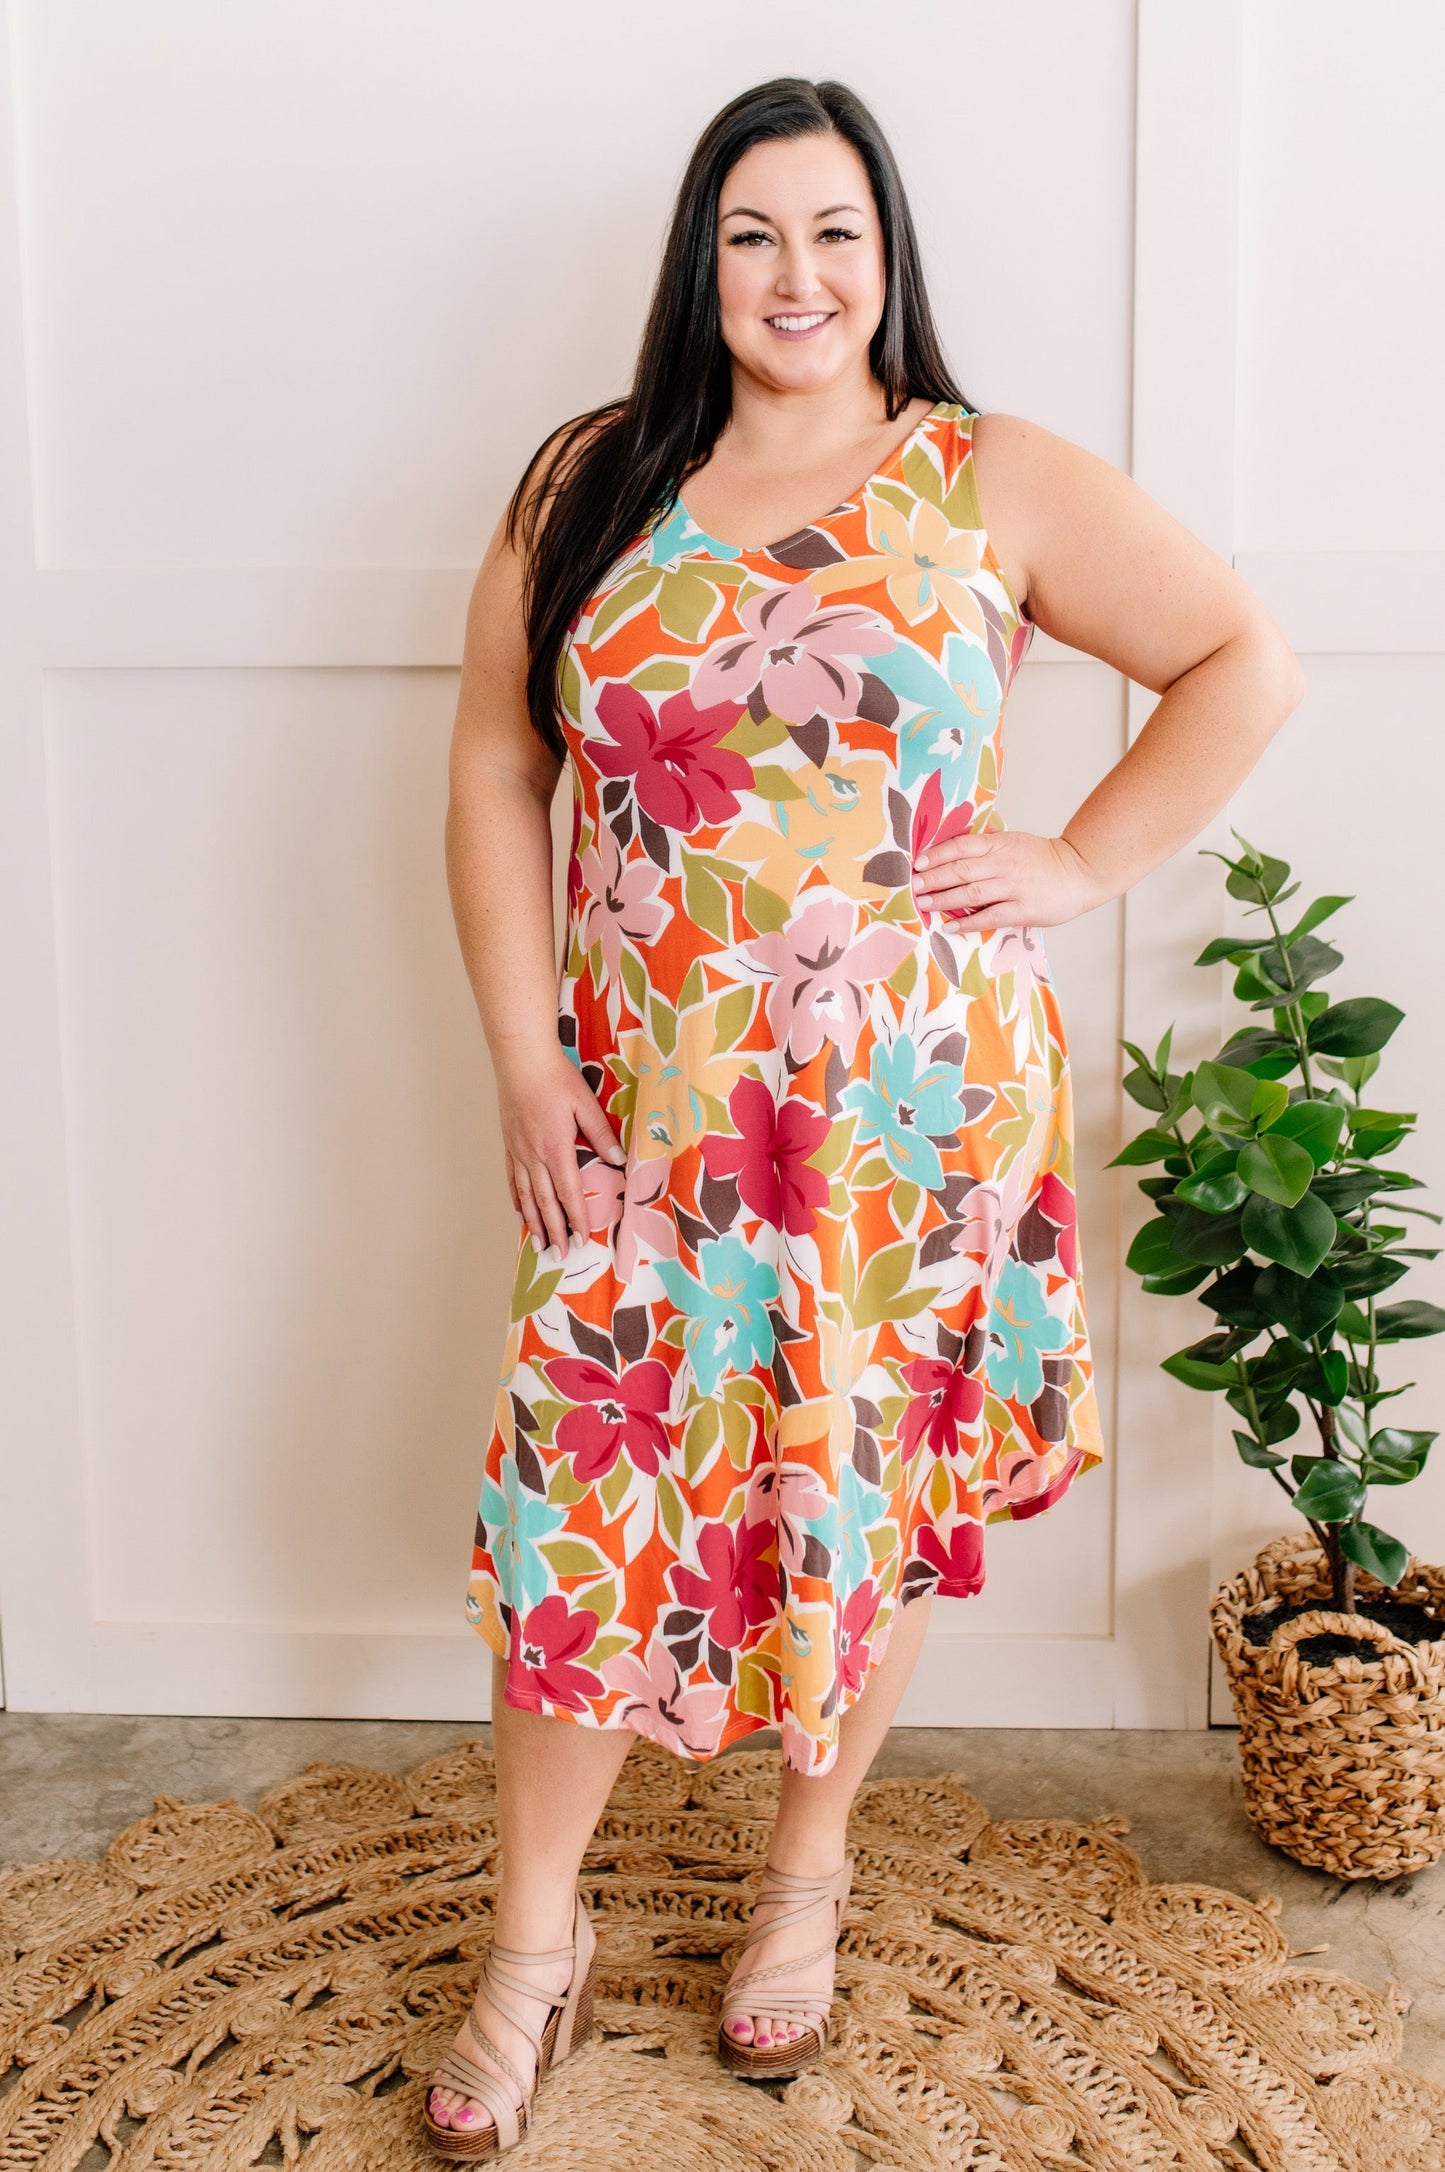 Sleeveless Midi Dress In Colorful Hibiscus Florals